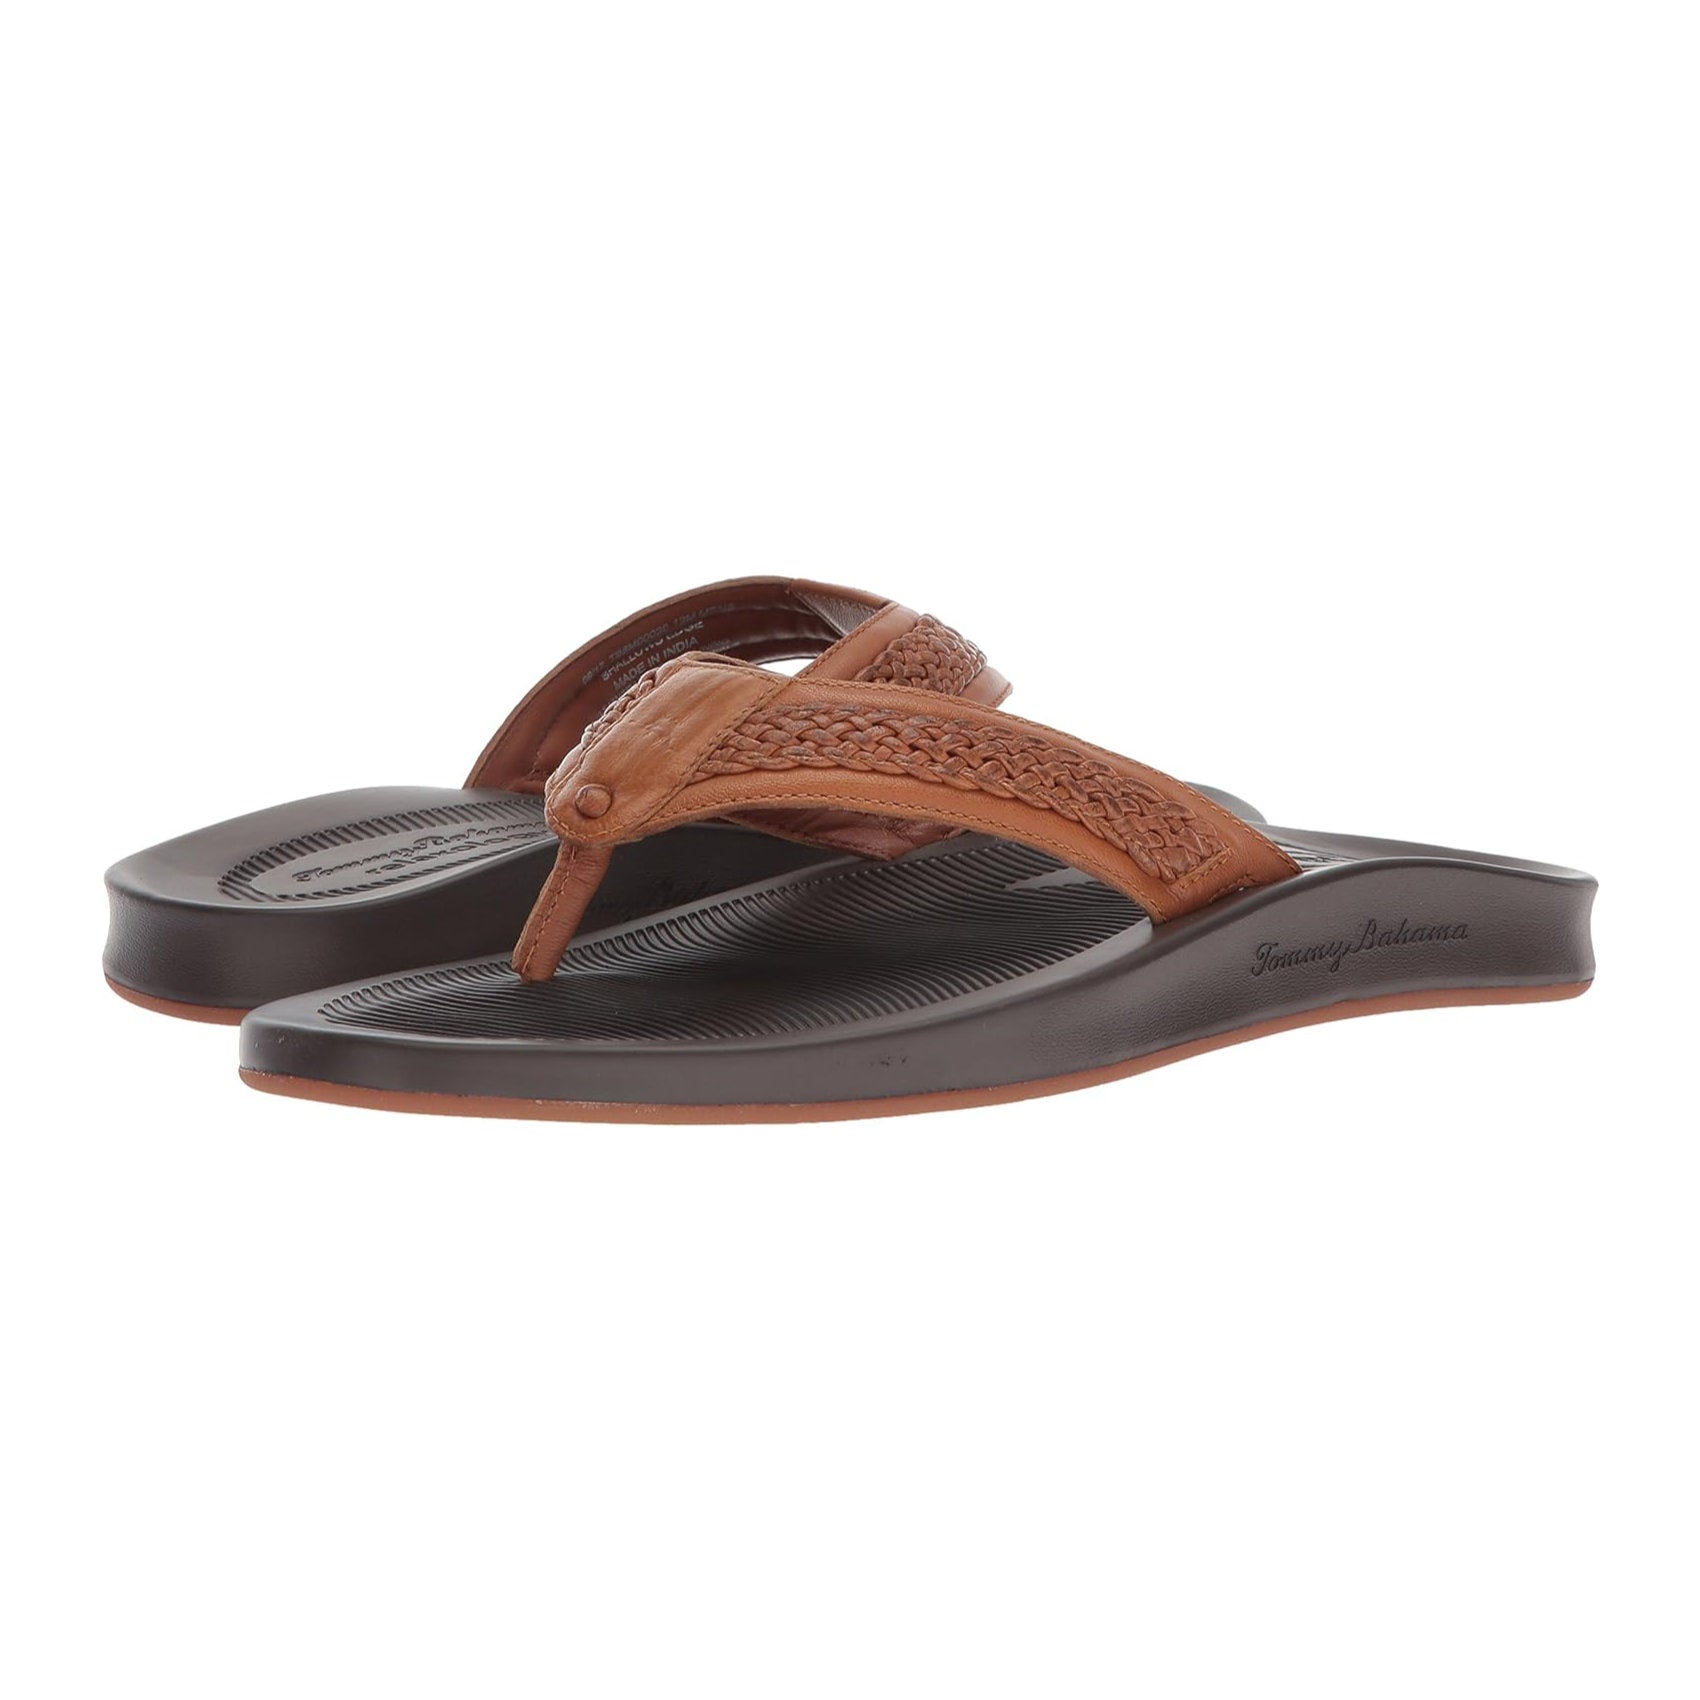 'Tommy Bahama Shallows Edge Vacation Sandals' in 'Brown' colour